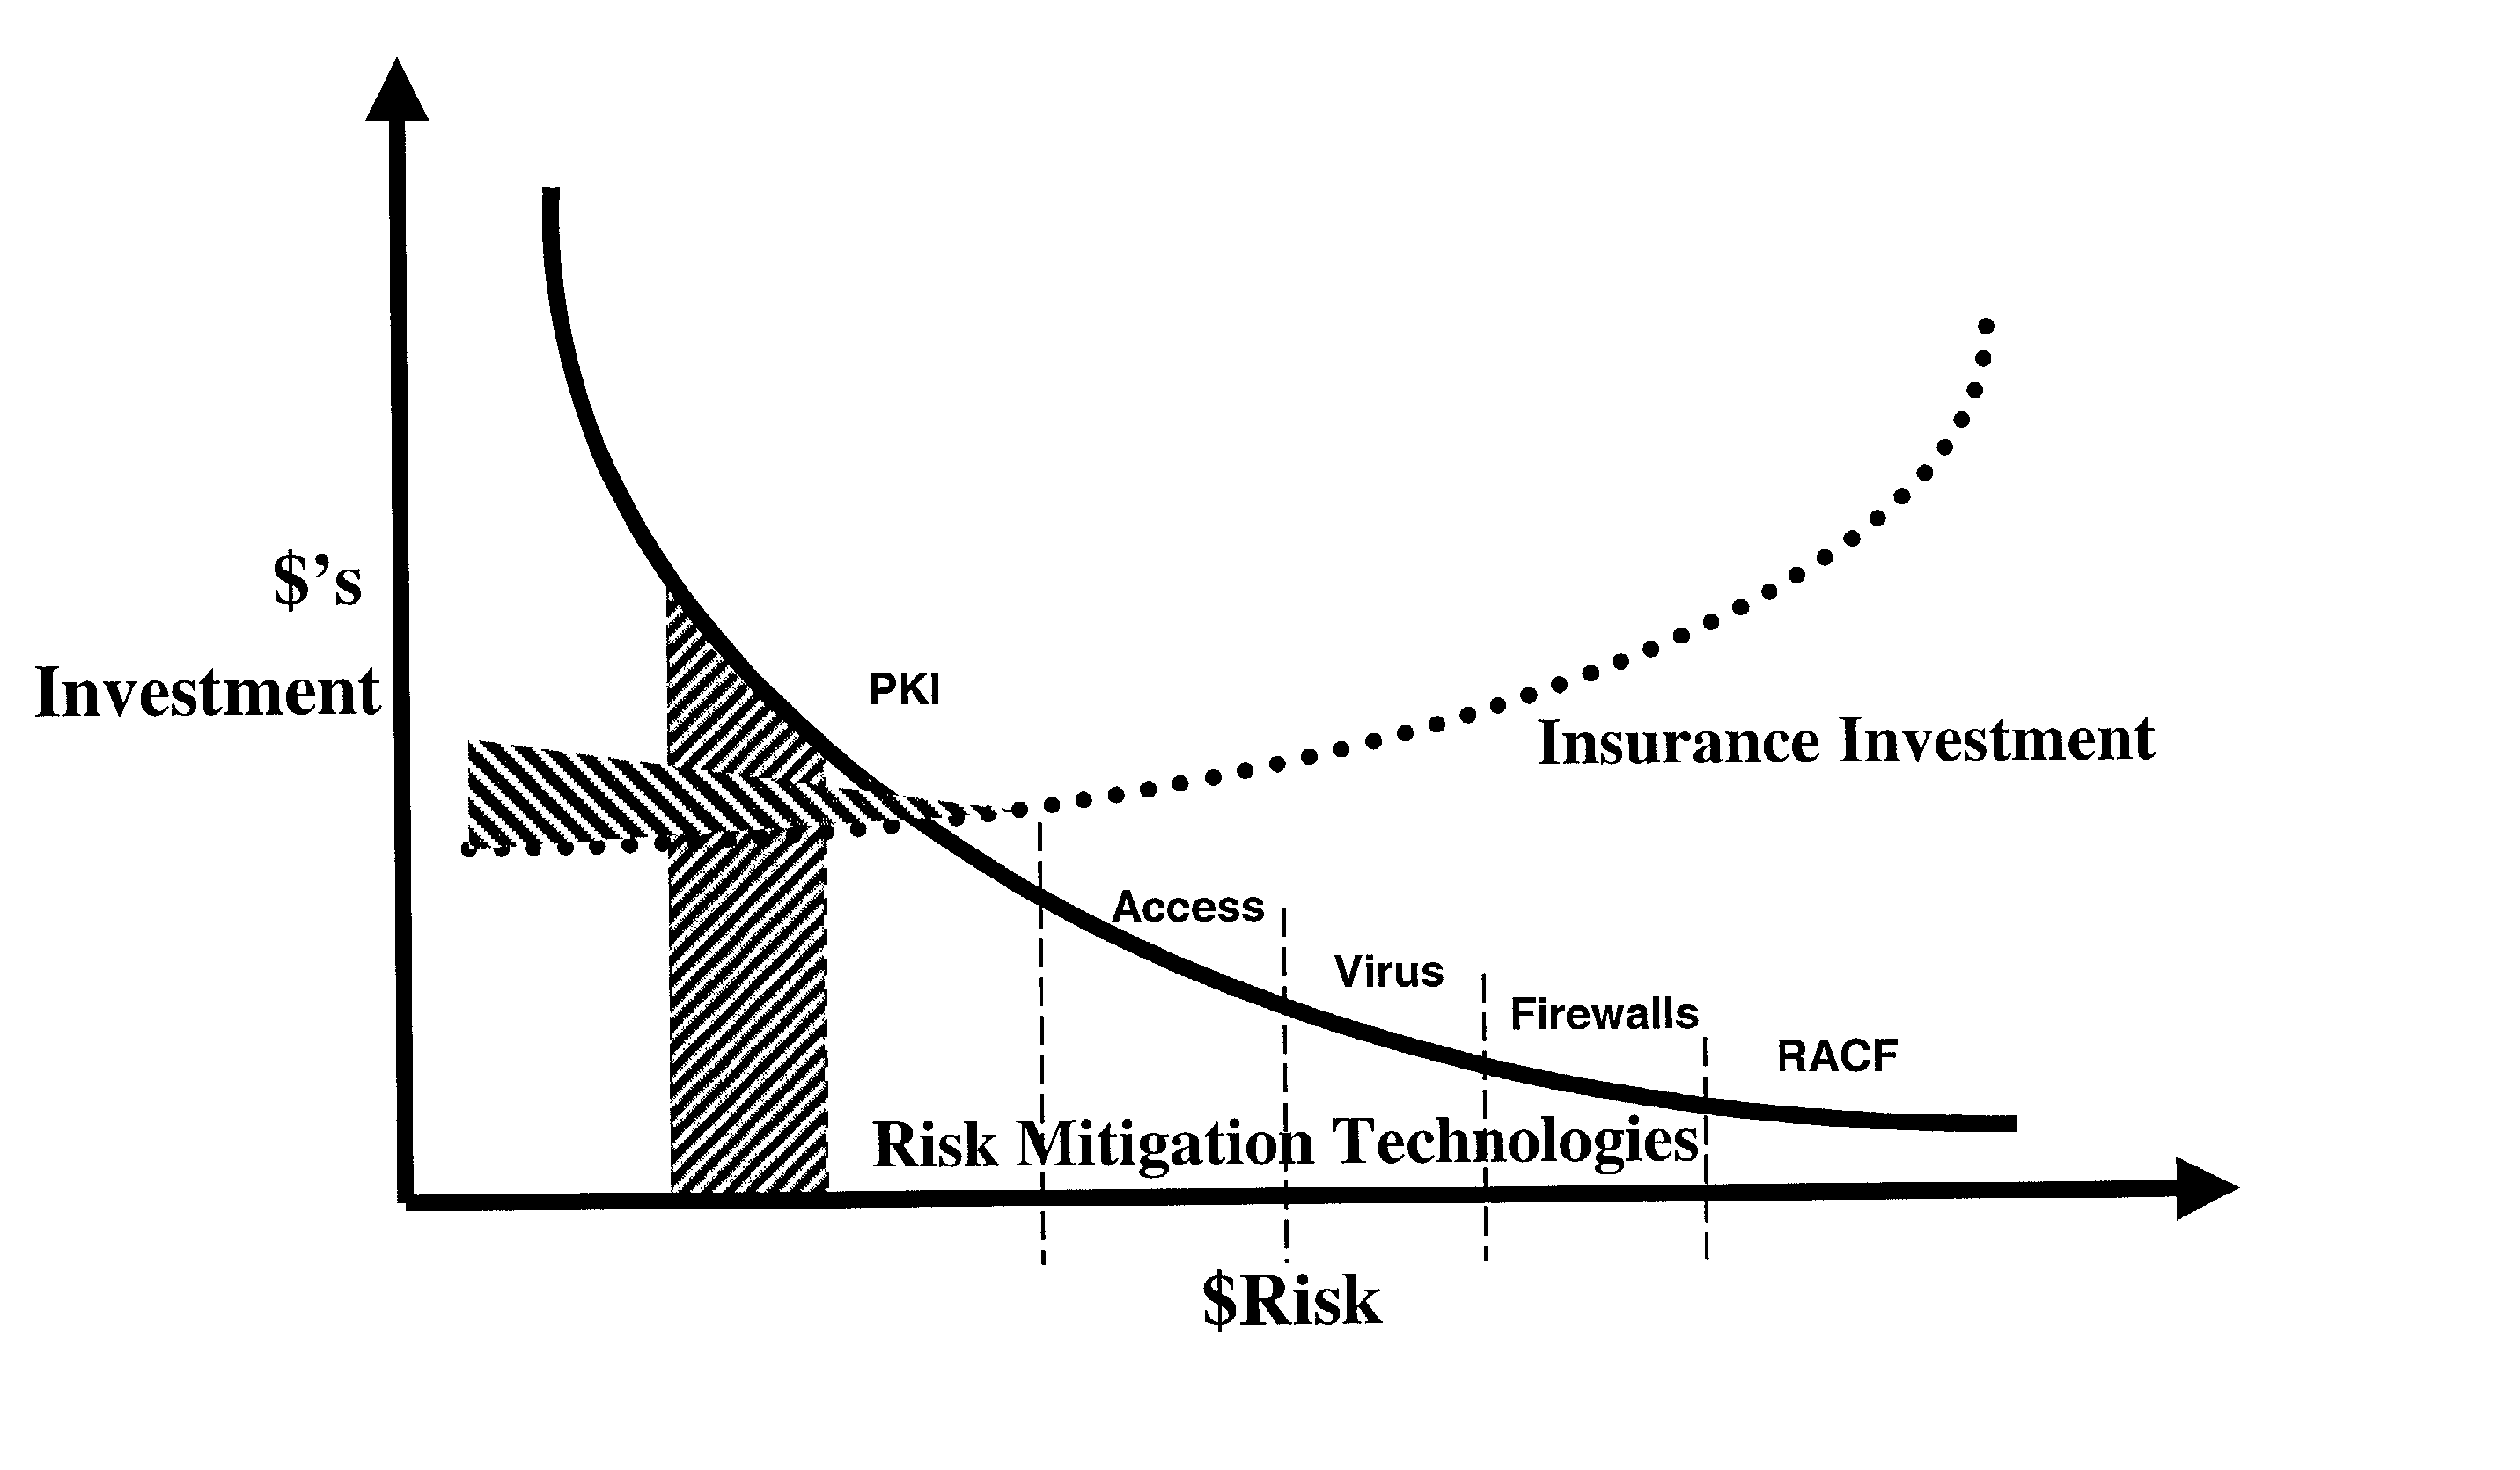 System for managing risks by combining risk insurance policy investments with risk prevention computer-based technology investments using common measurement methods